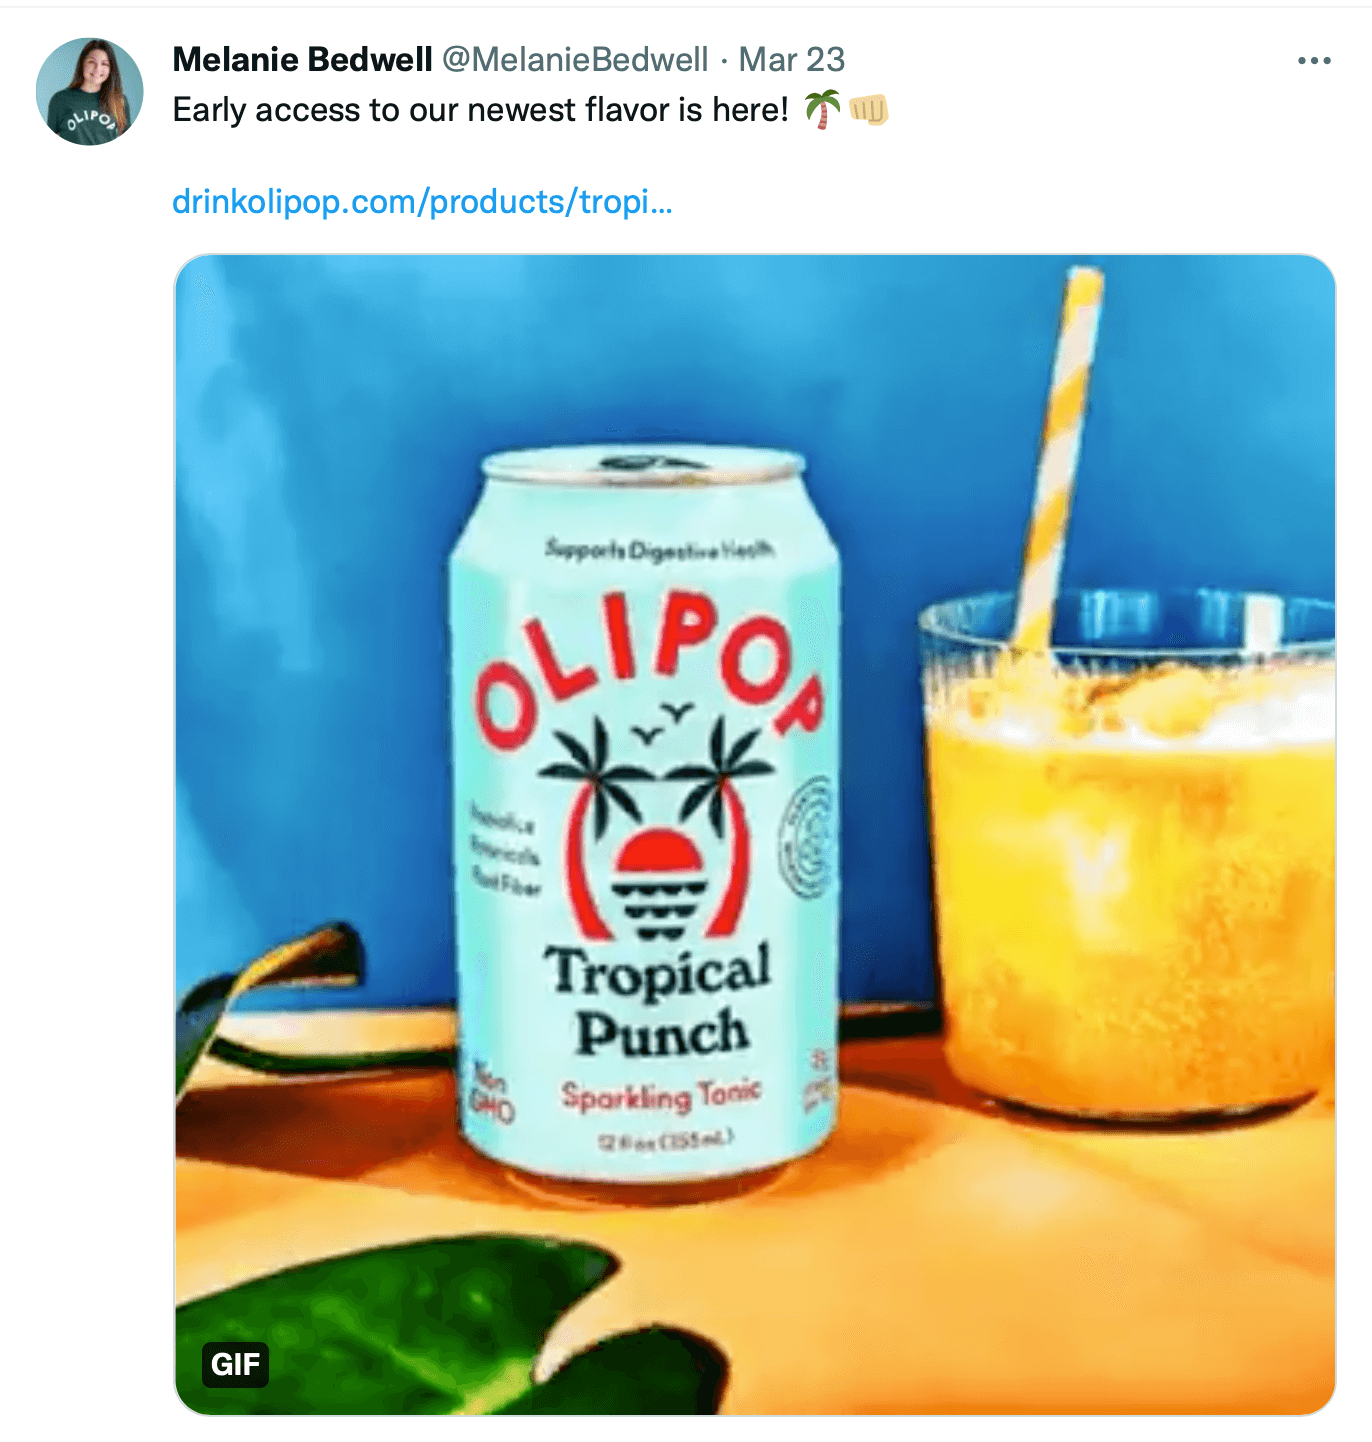 image of employee tweet about employer's new product